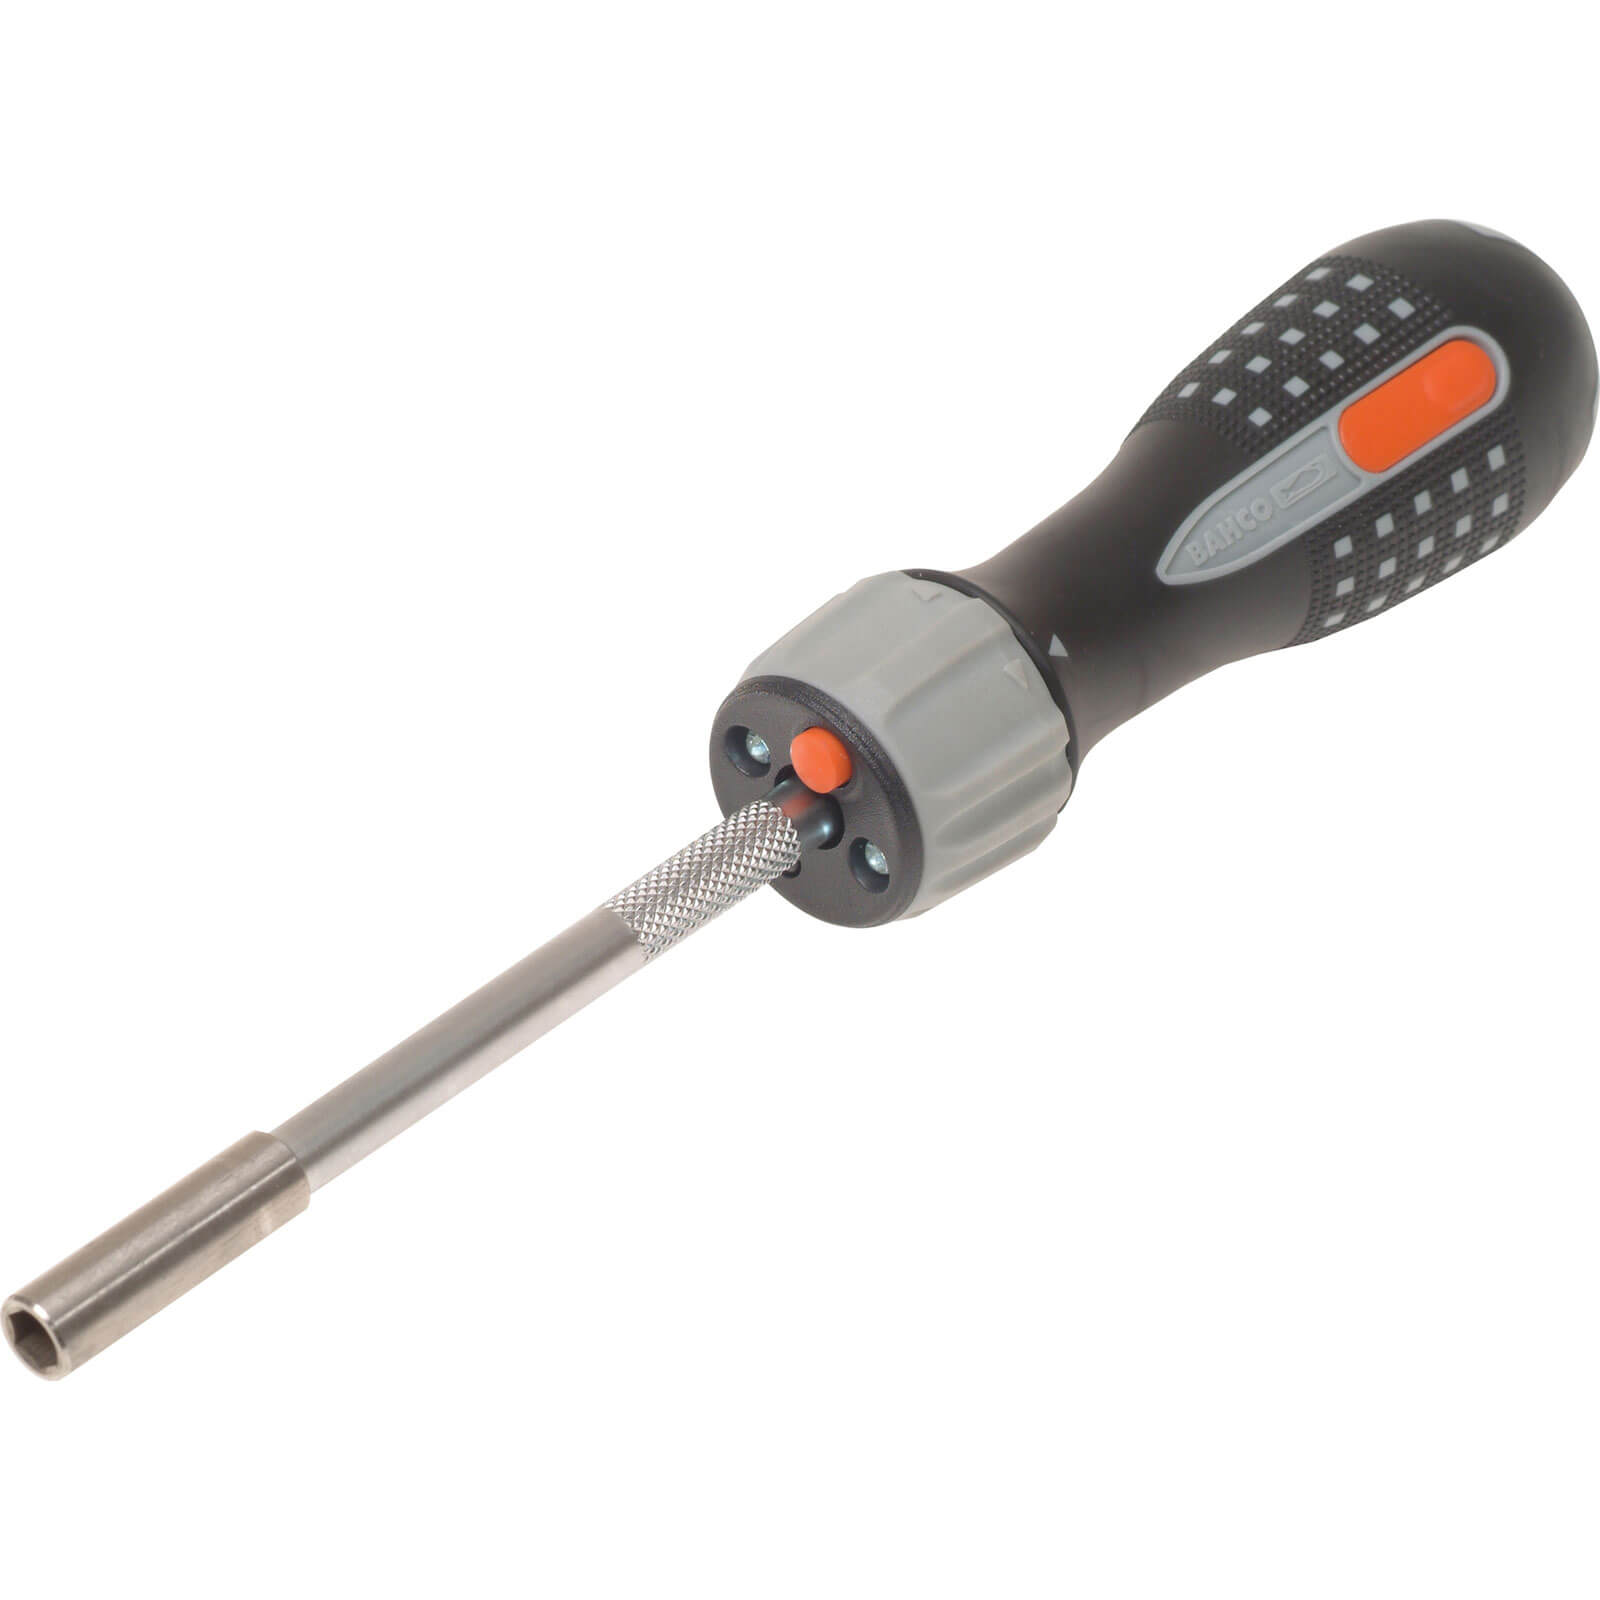 Bahco Ratchet Screwdriver + Bits with LED Light